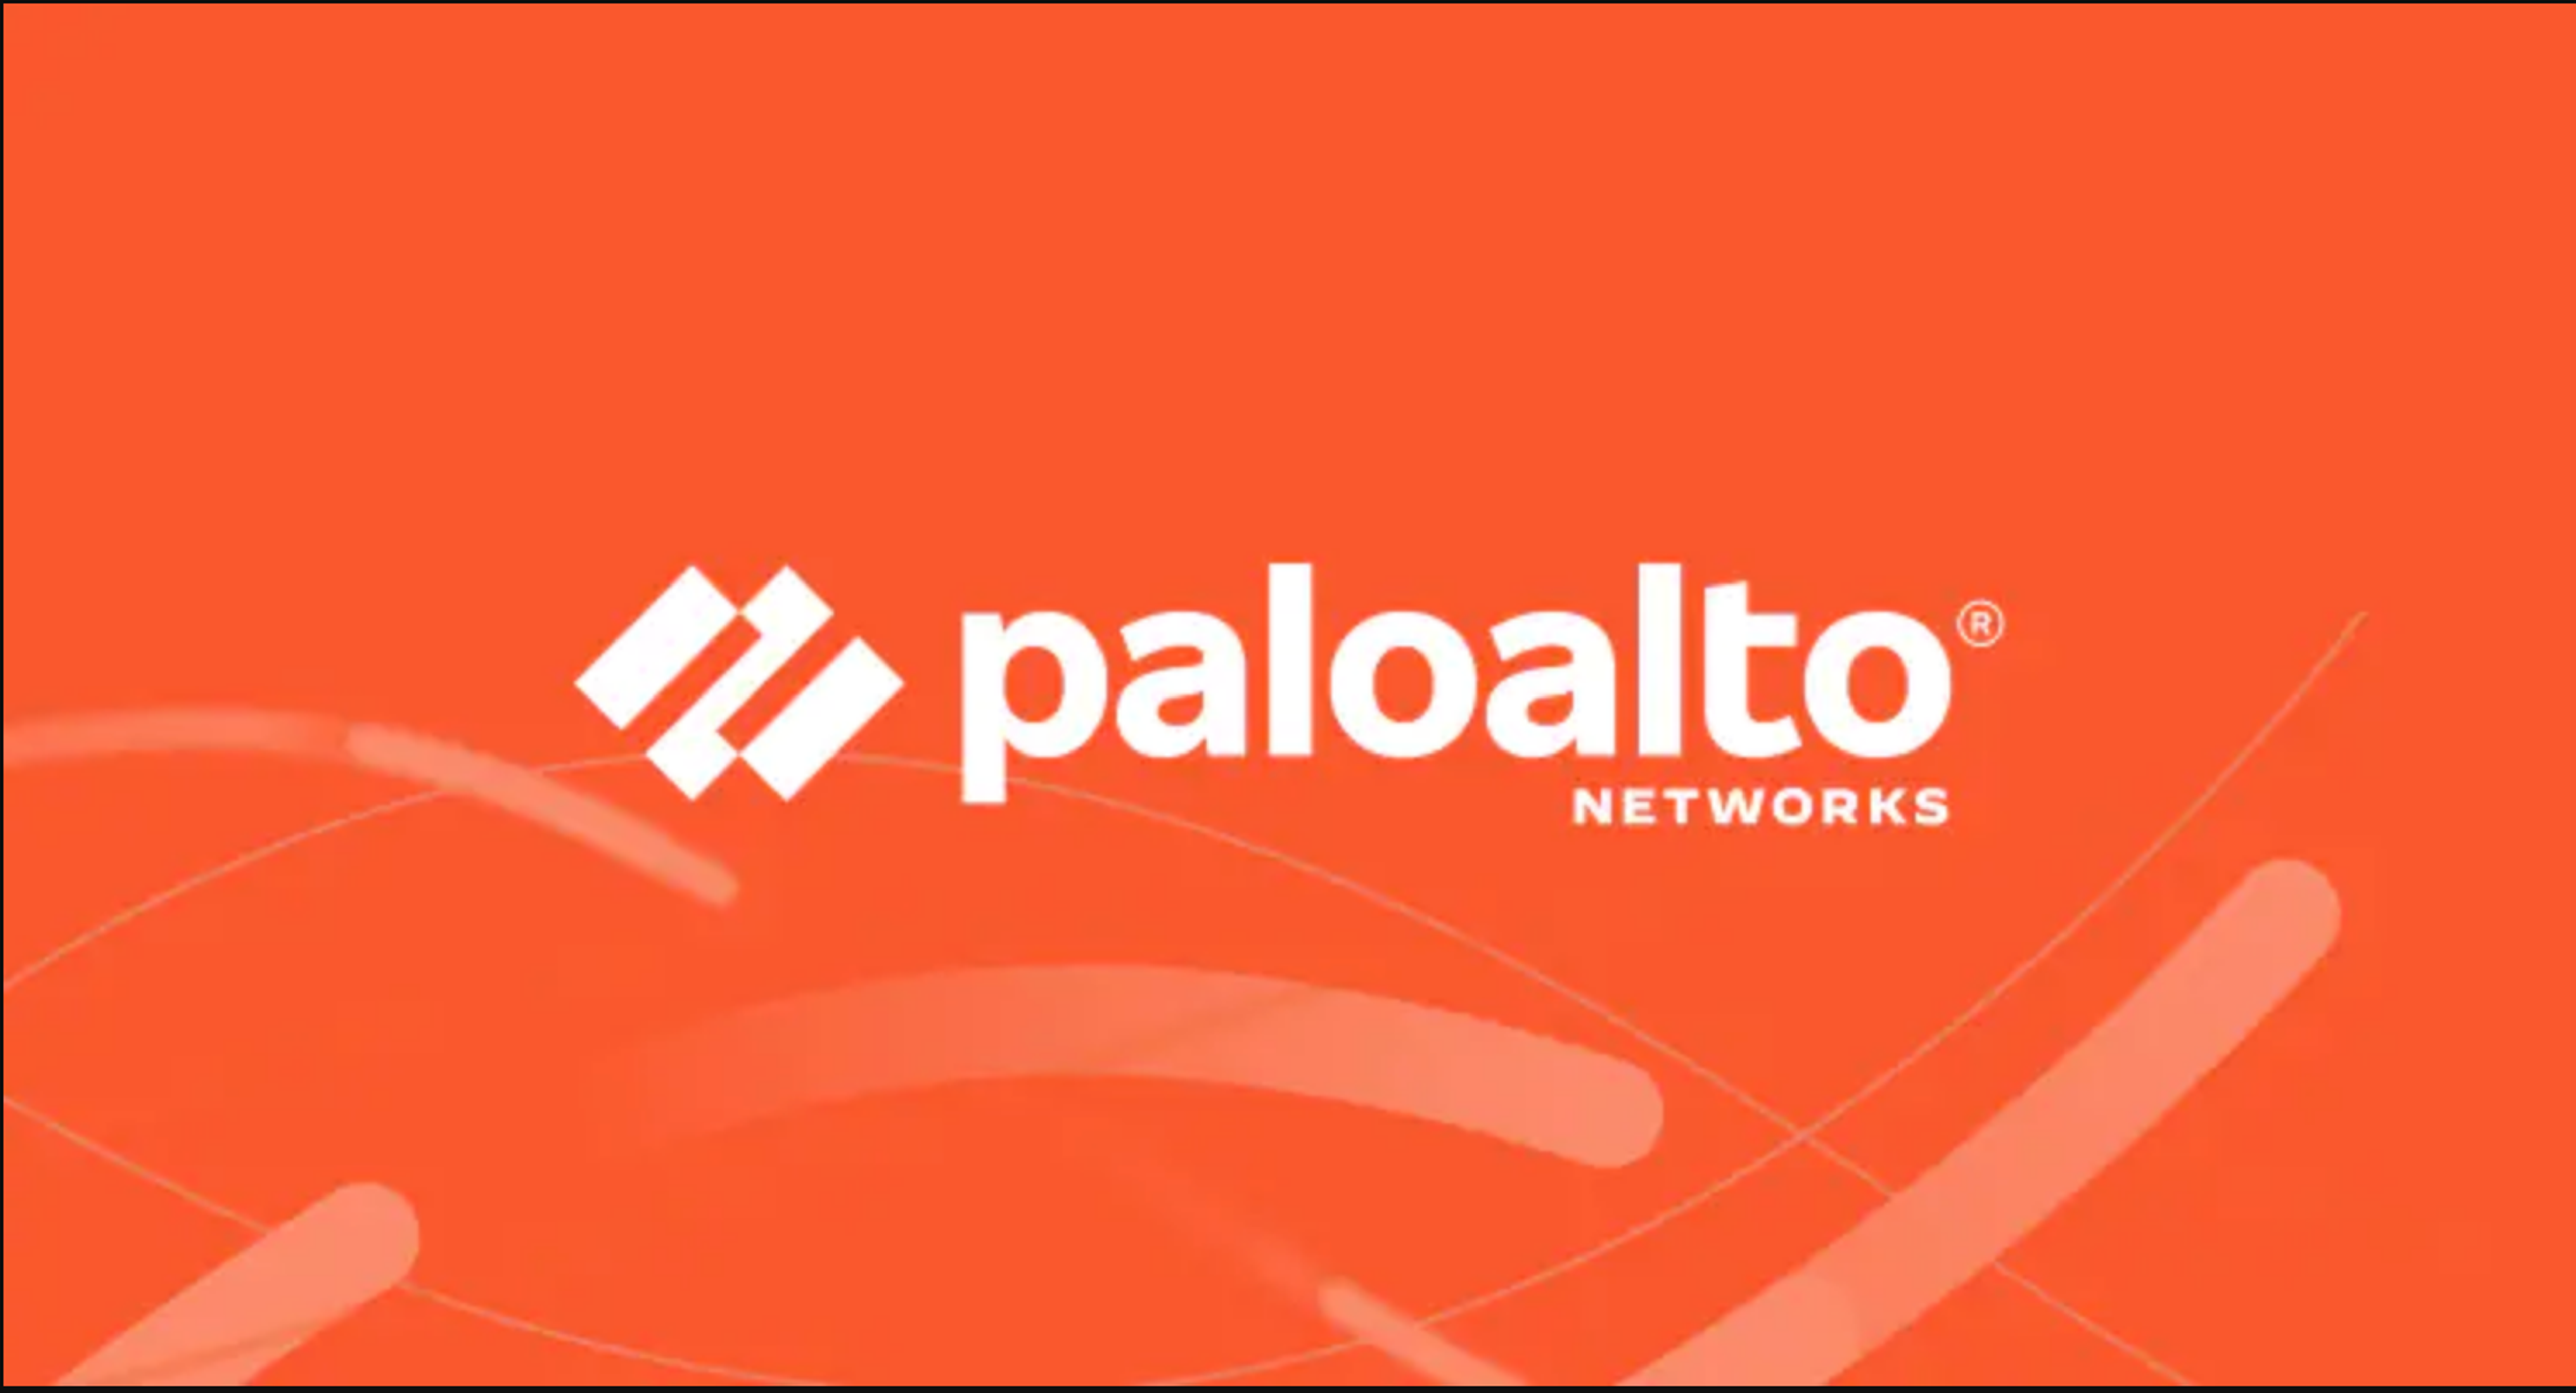 7 Analysts On Palo Alto Networks And Its Journey To Reach A $100B Market Cap